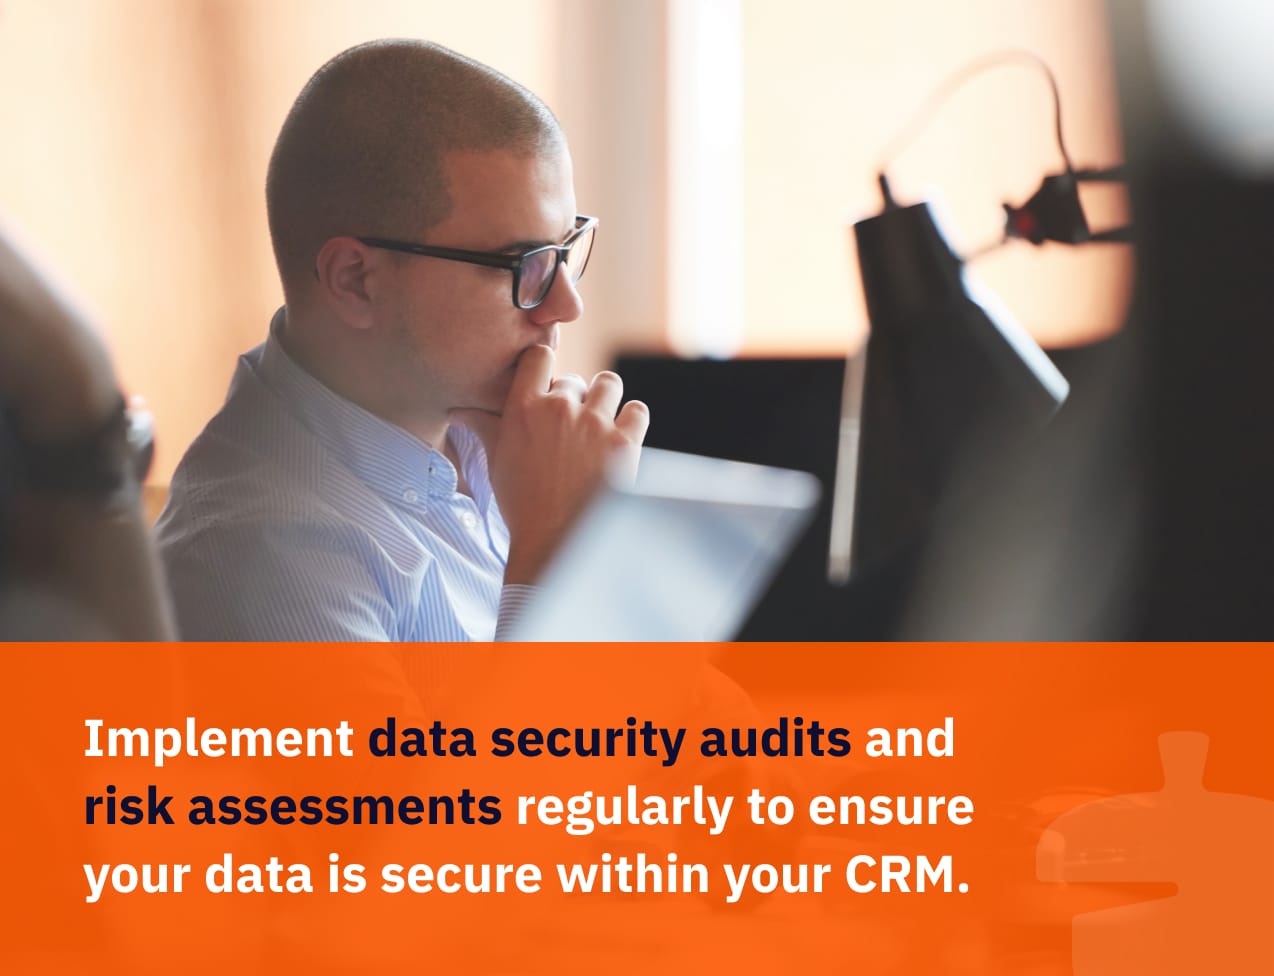 ensure your data is secure with data security audits and risk assessments